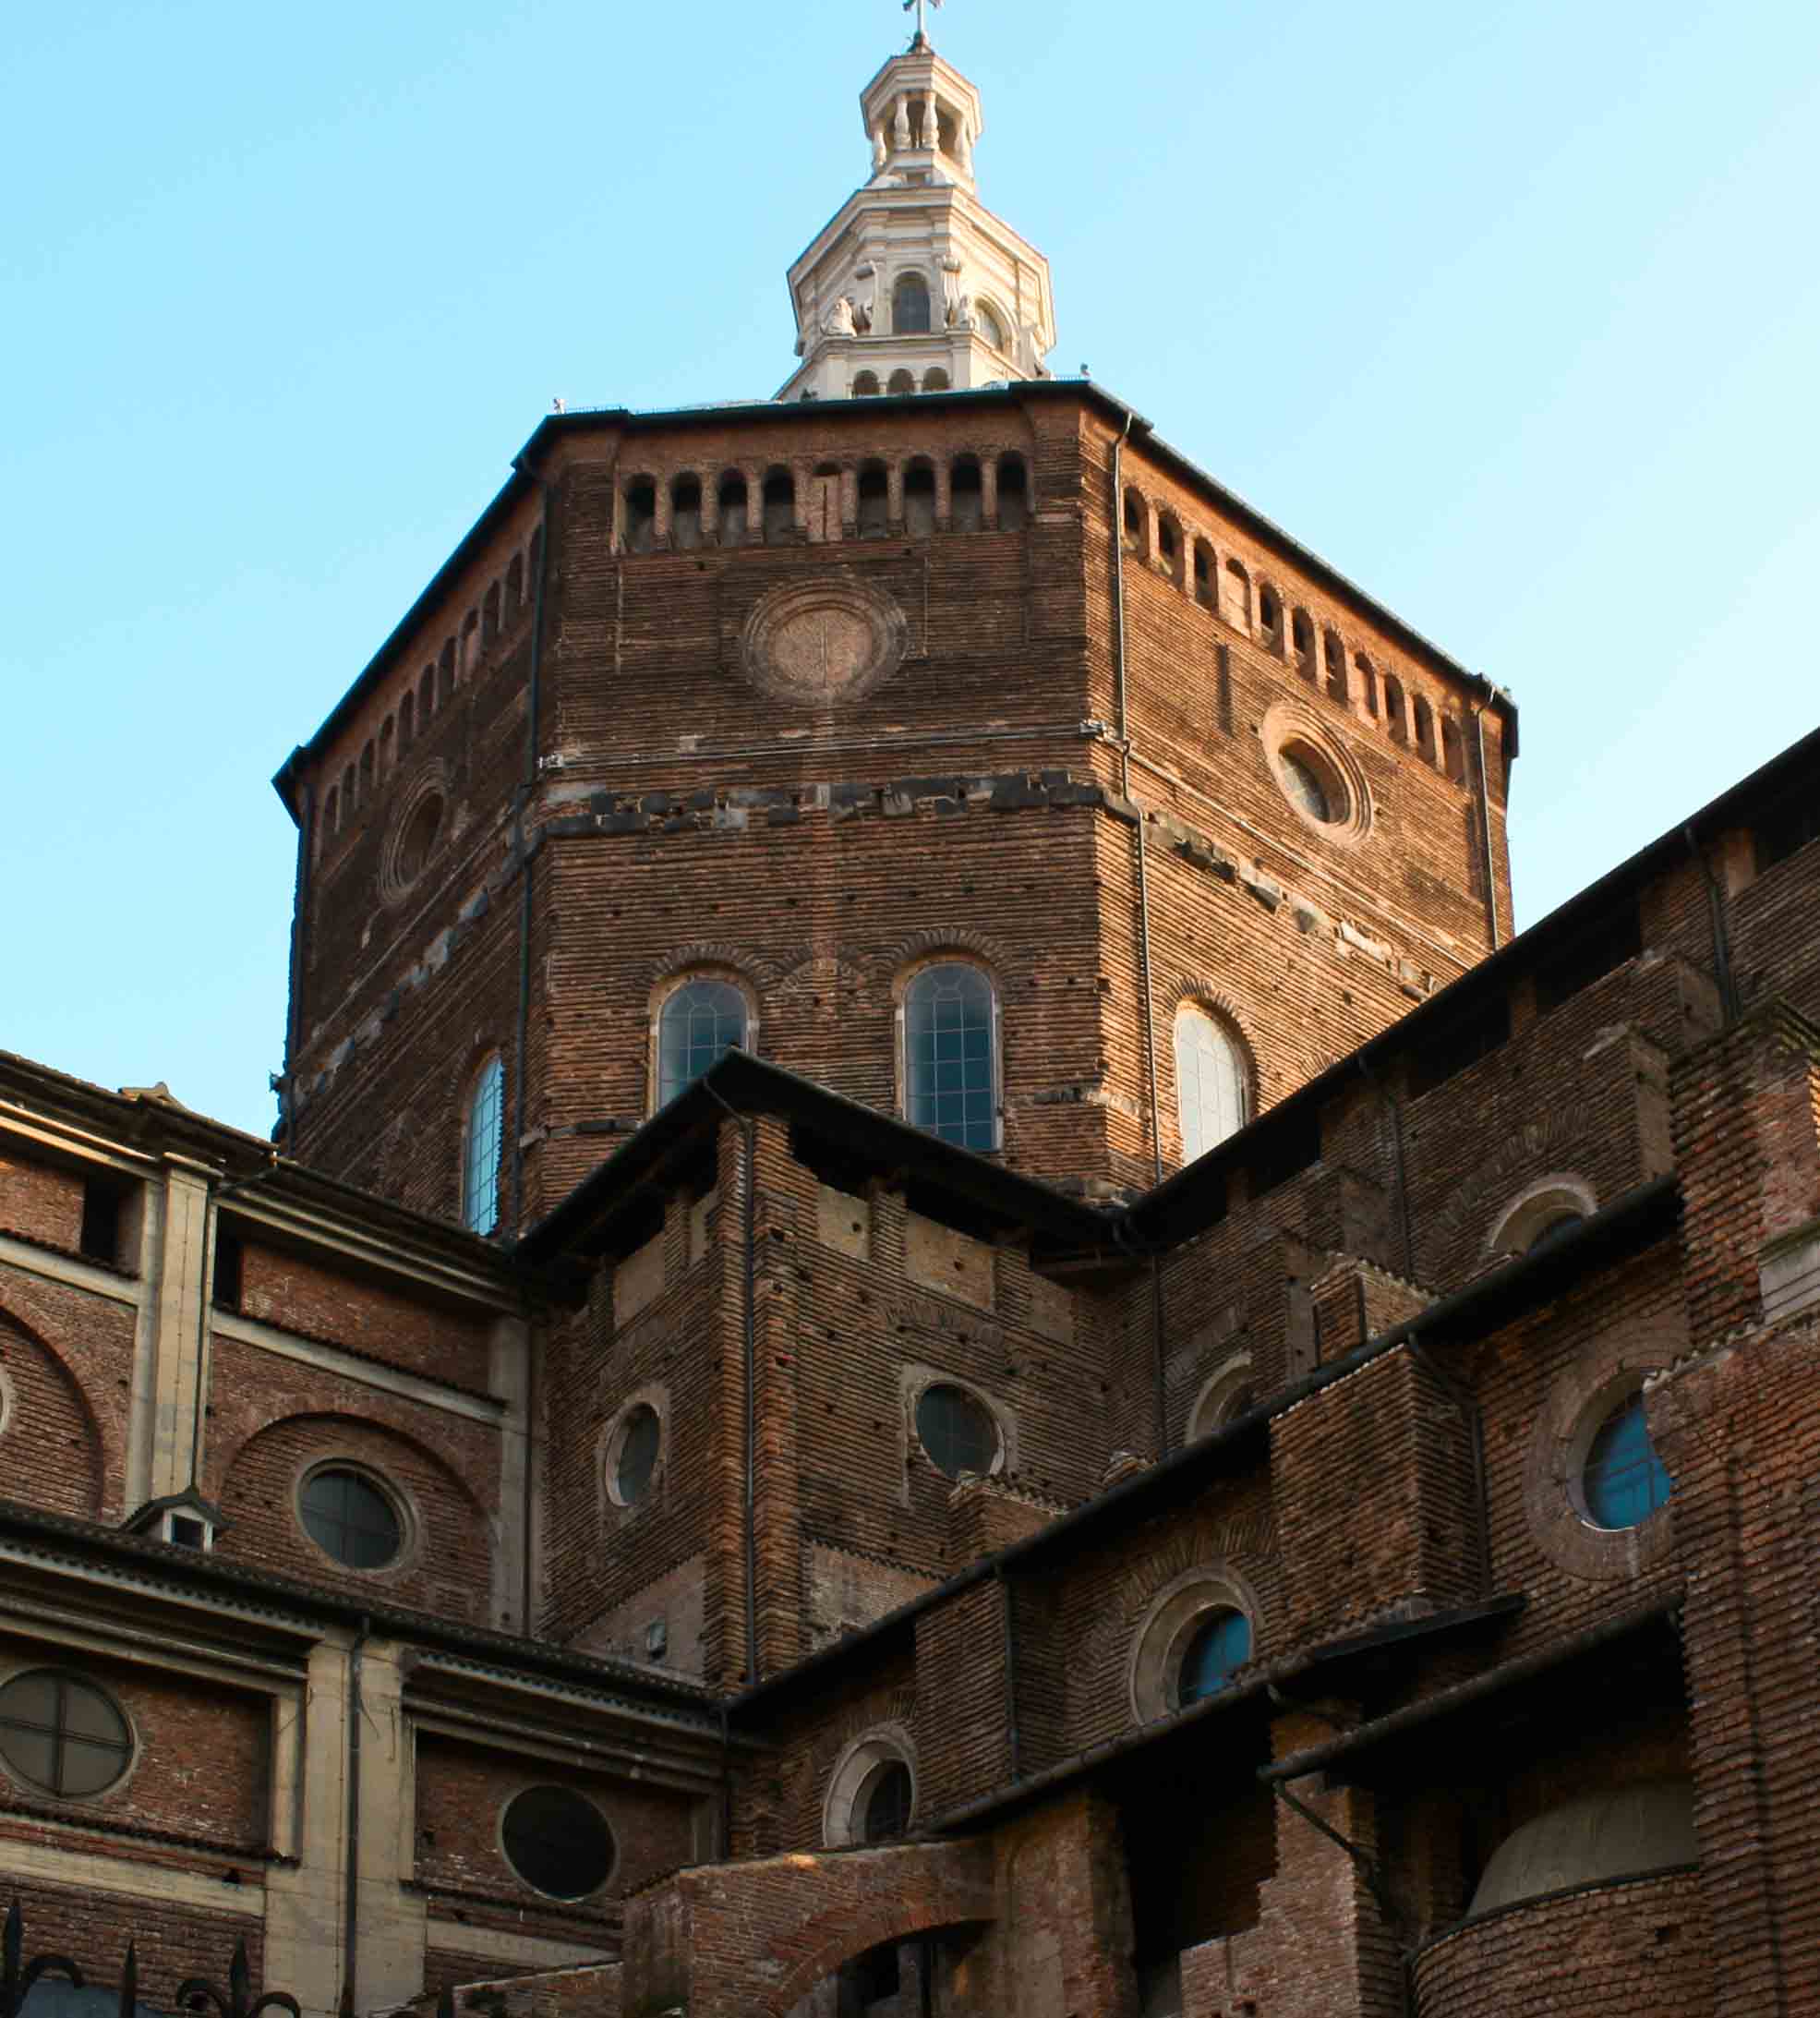 The cathedral of Pavia.